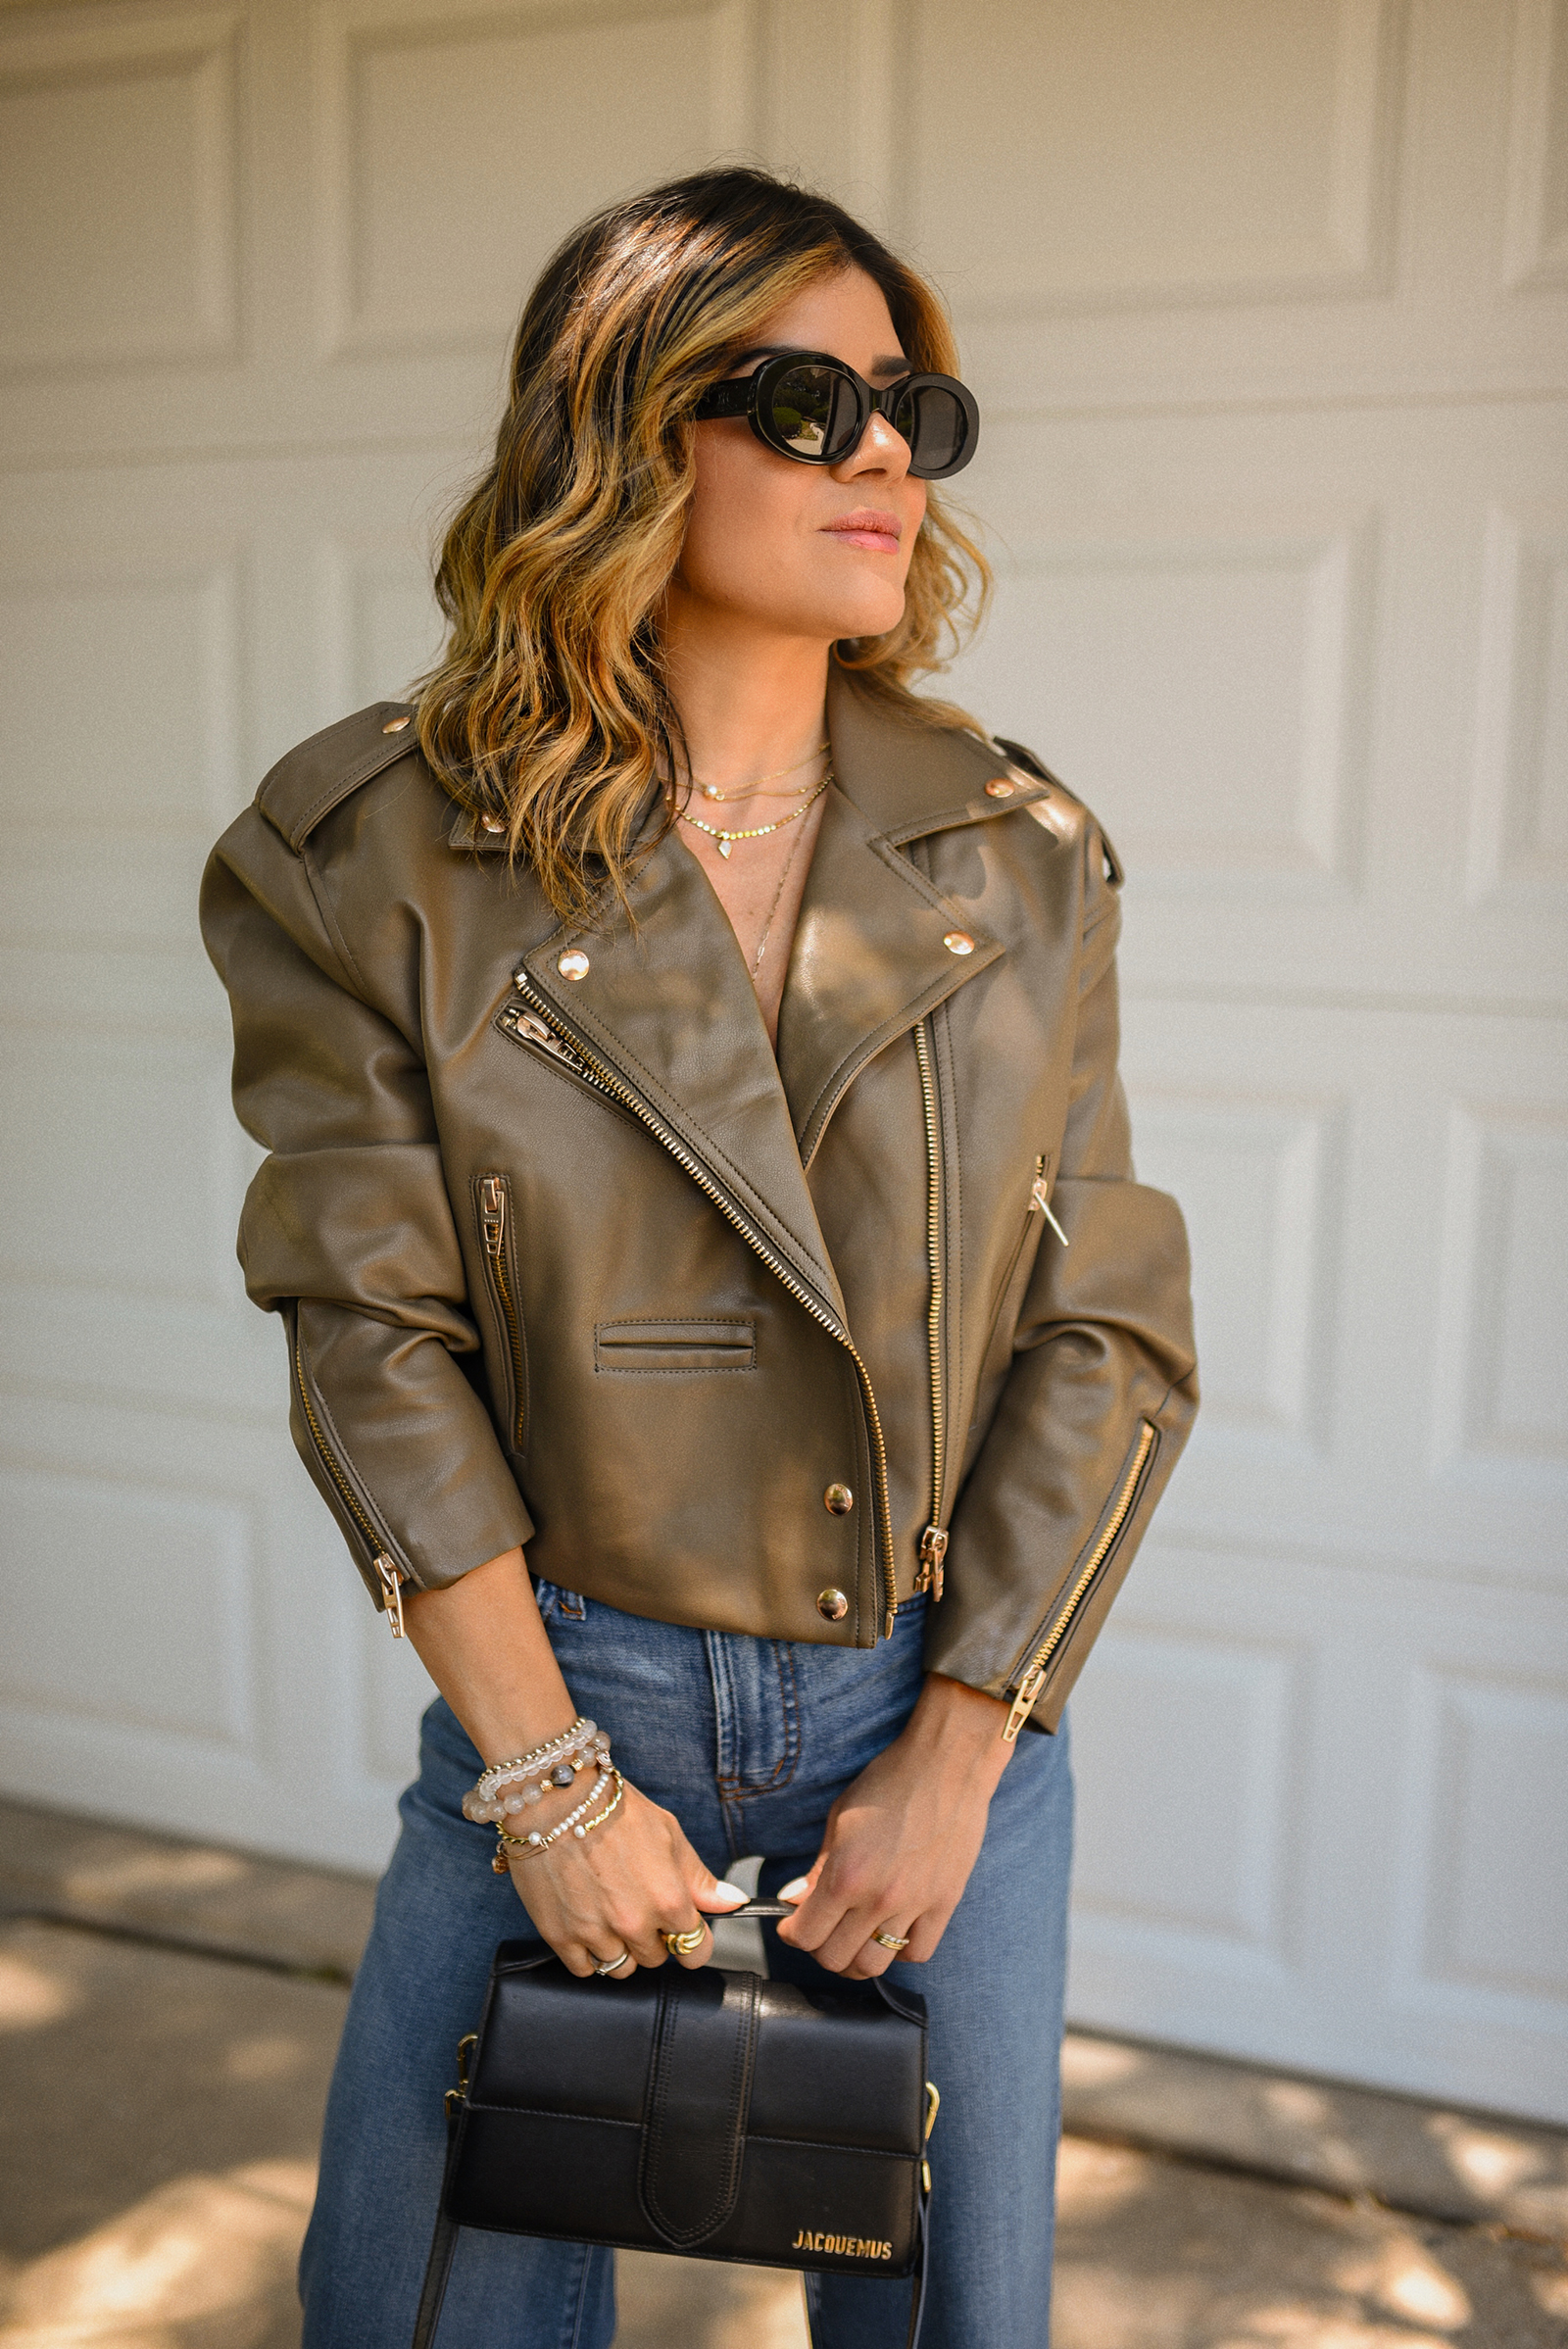 Carolina Hellal of Chic Talk wearing a wide leg jeans via Madewell, a Faux Leather Crop Moto Jacket via Nordstrom, a Nano Croc-Embossed Leather Tote via Strathberry and Celine sunglasses